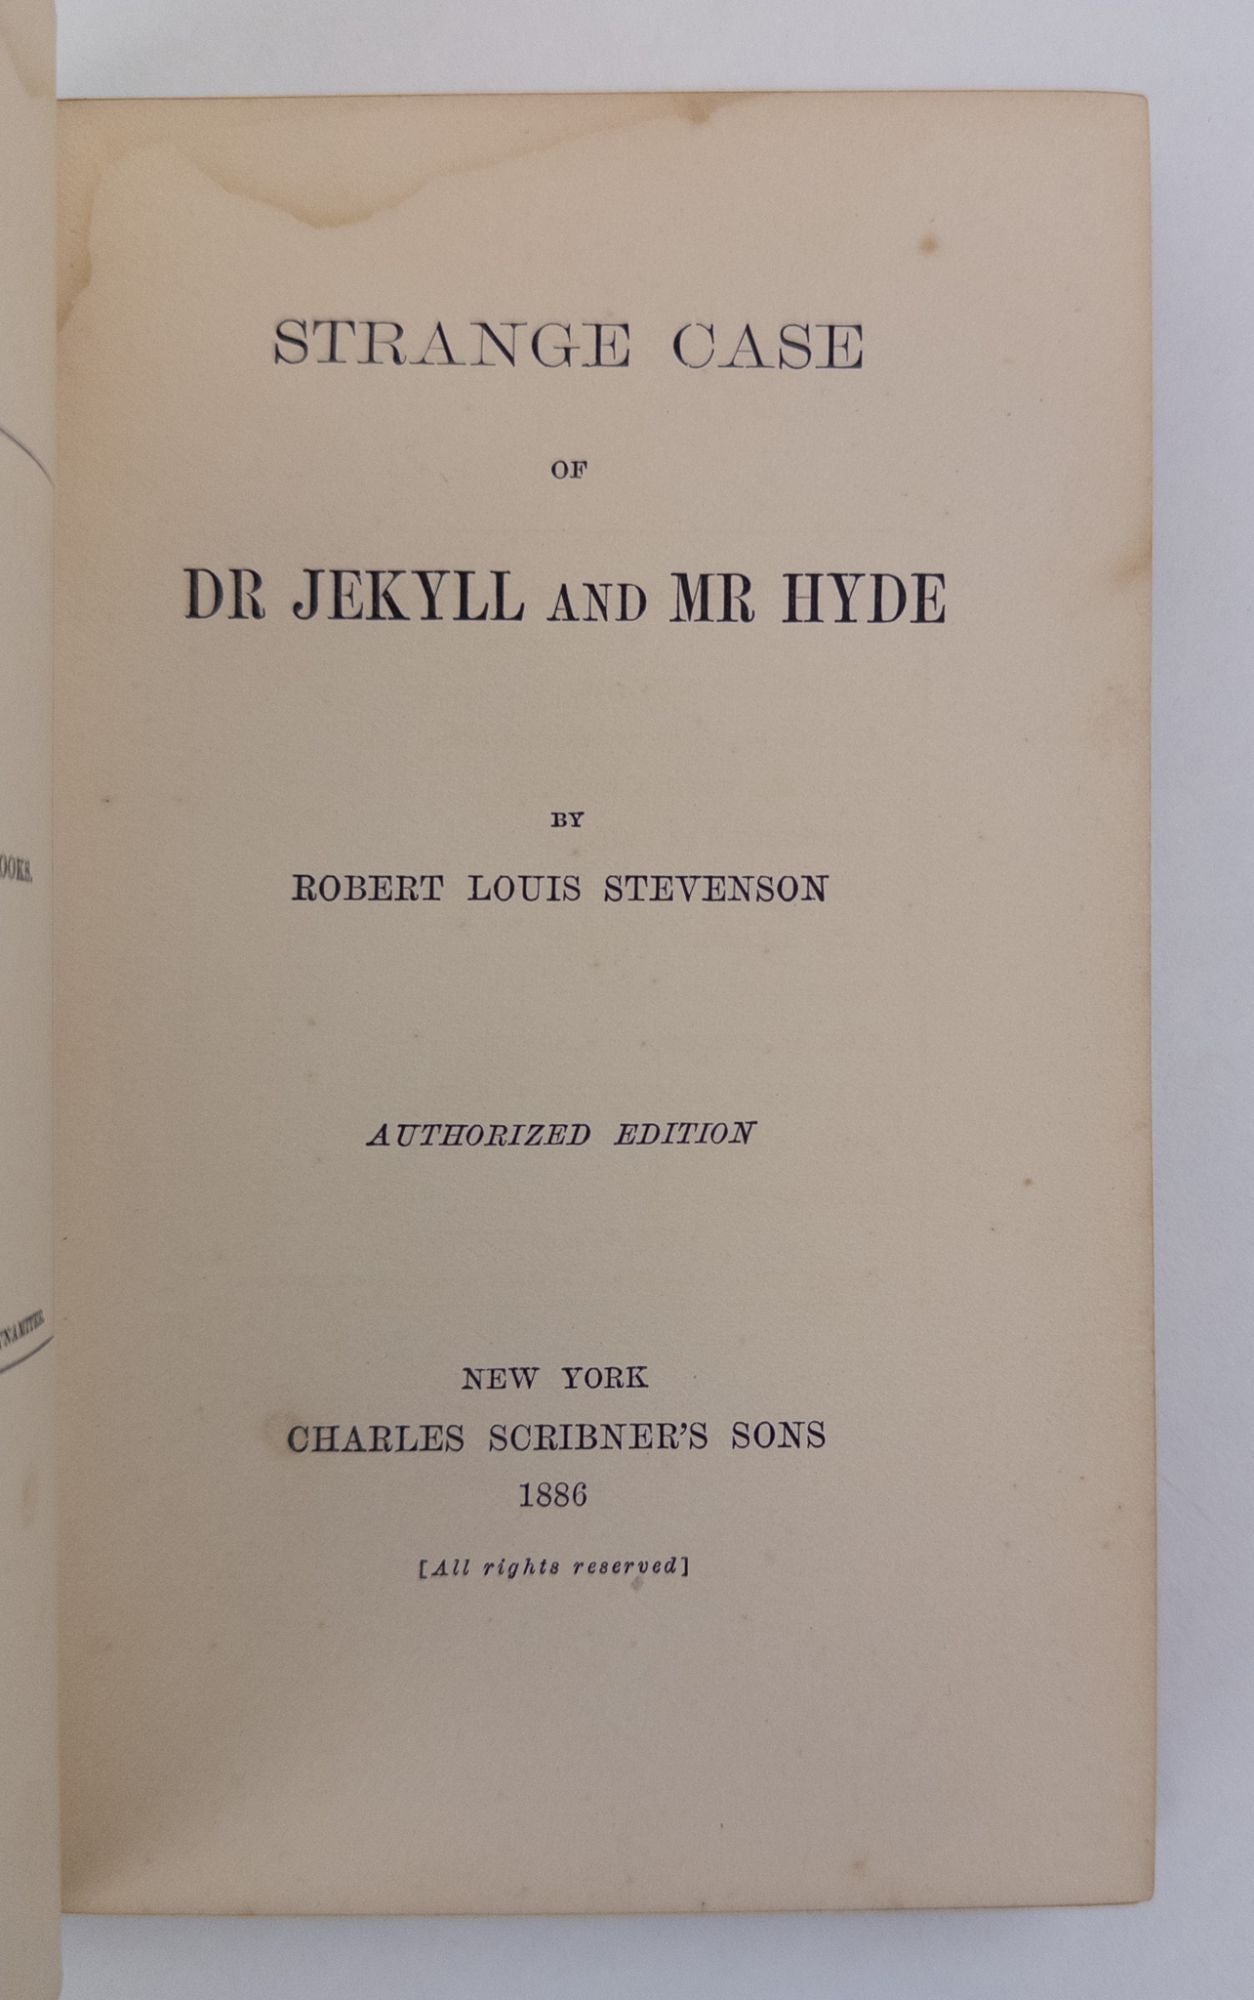 Product Image for STRANGE CASE OF DR. JEKYLL AND MR. HYDE